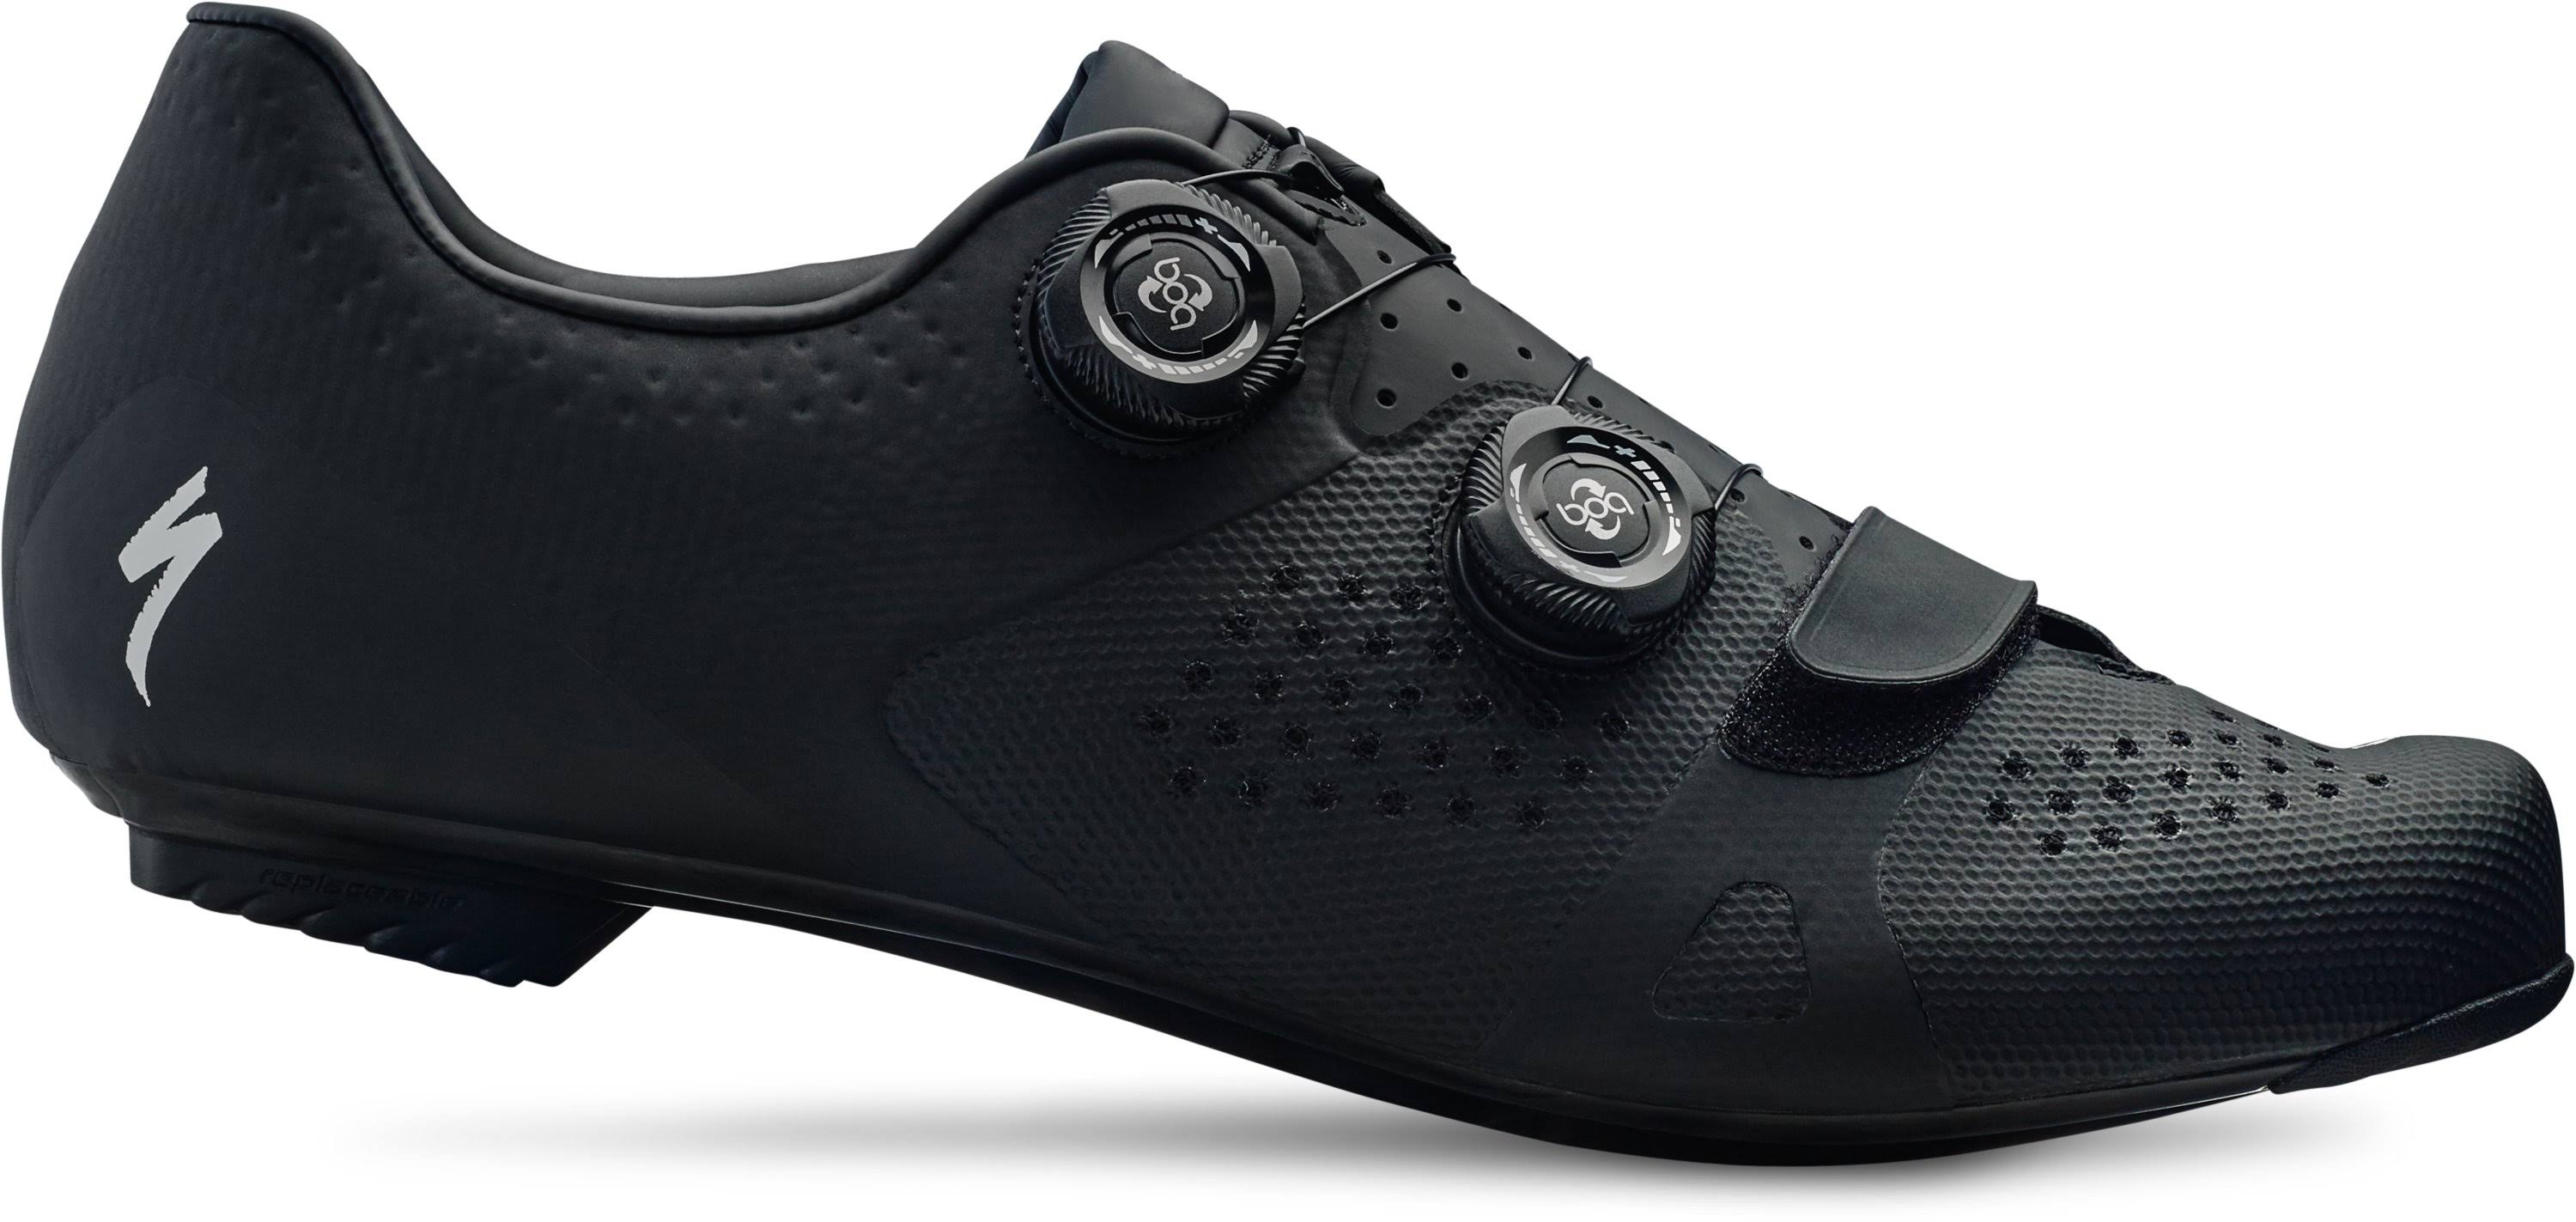 Specialized Torch 2.0 Road Shoes - Black, Size 44